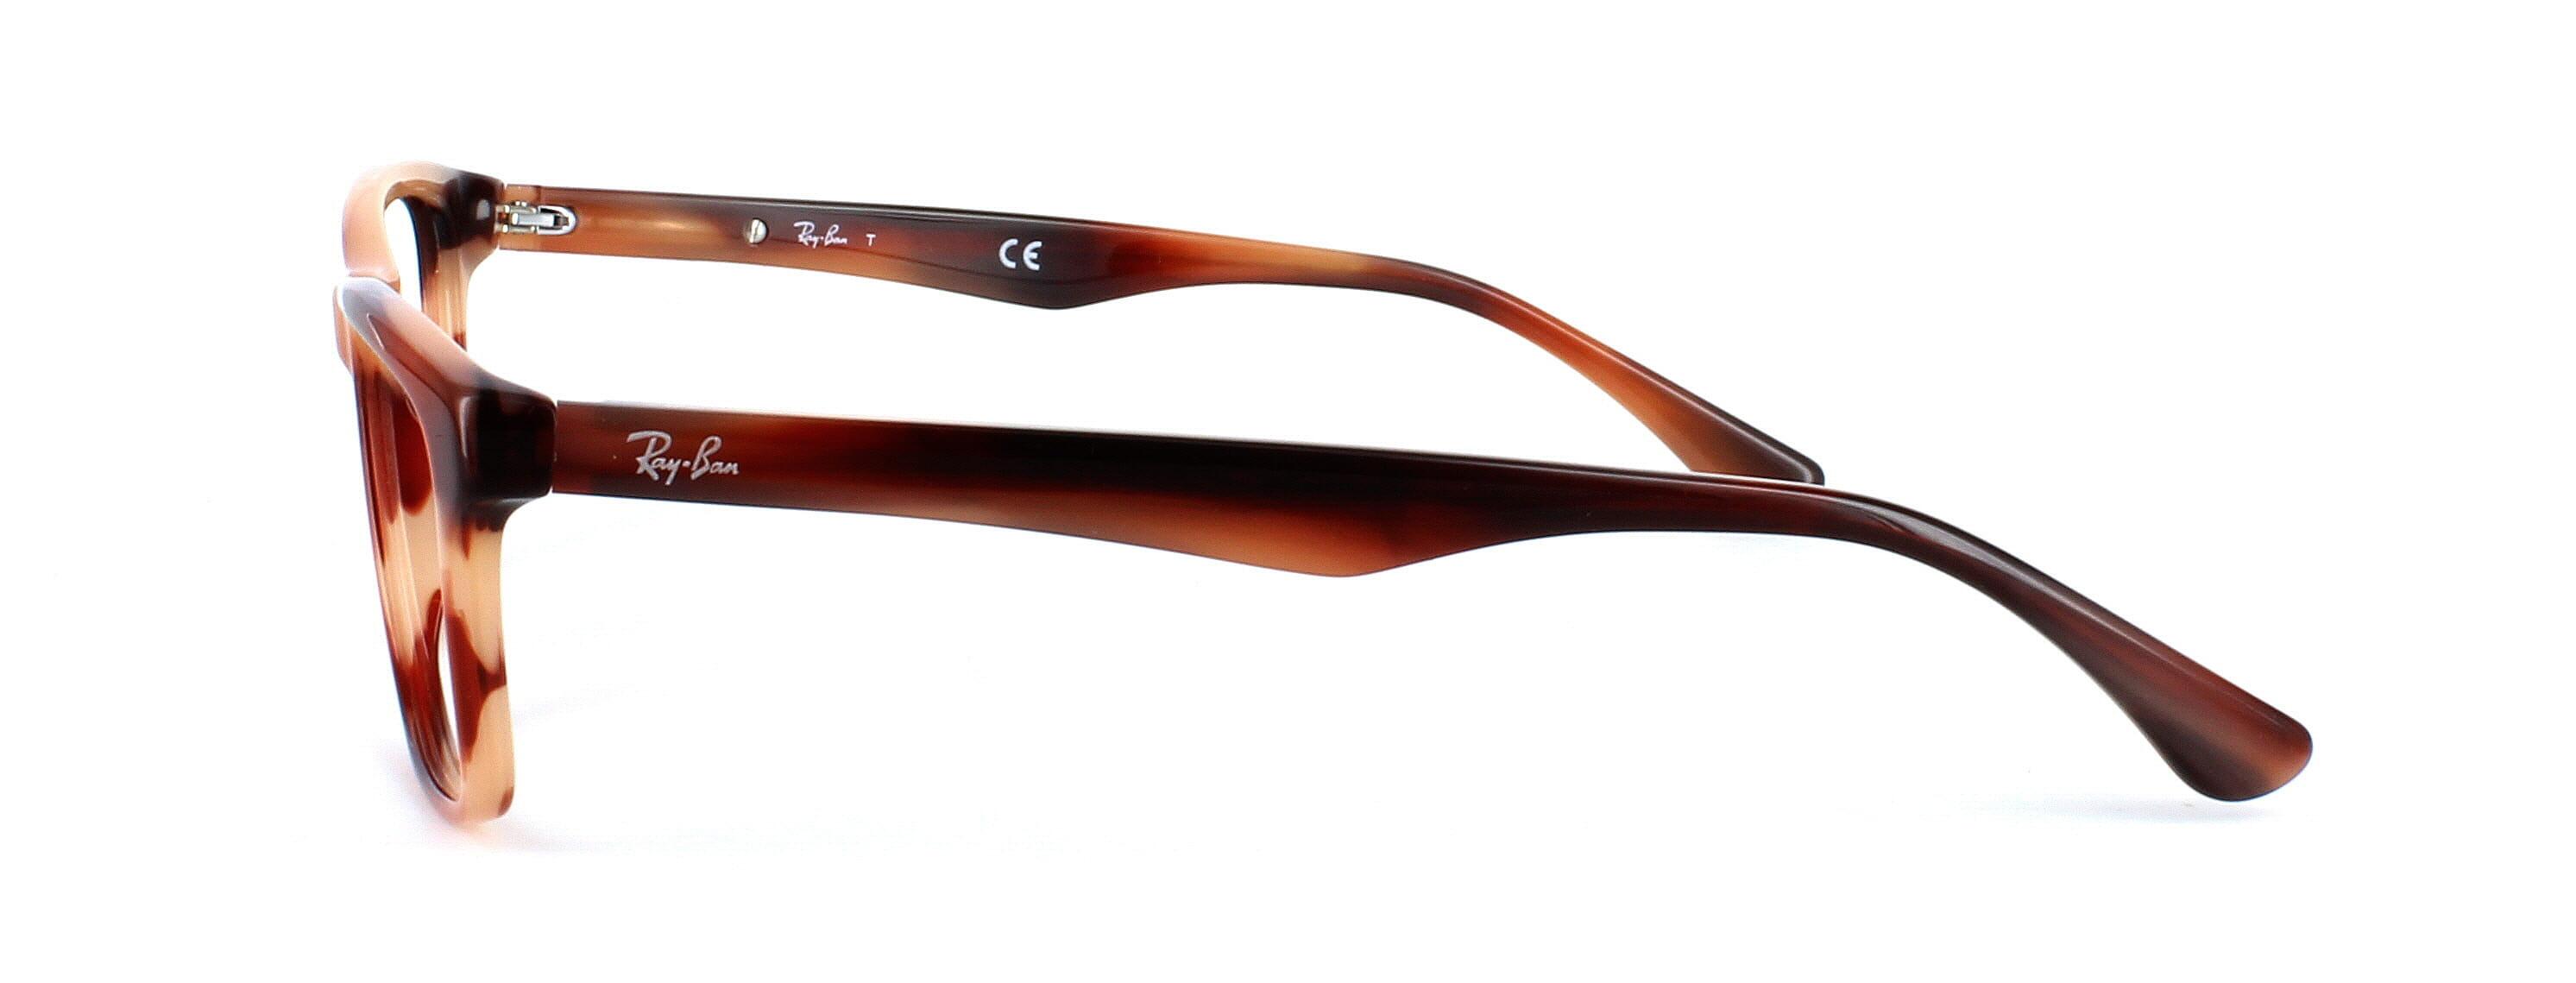 Unisex acetate glasses by Ray Ban. Model 5279 5774 - mottled brown - image view 3